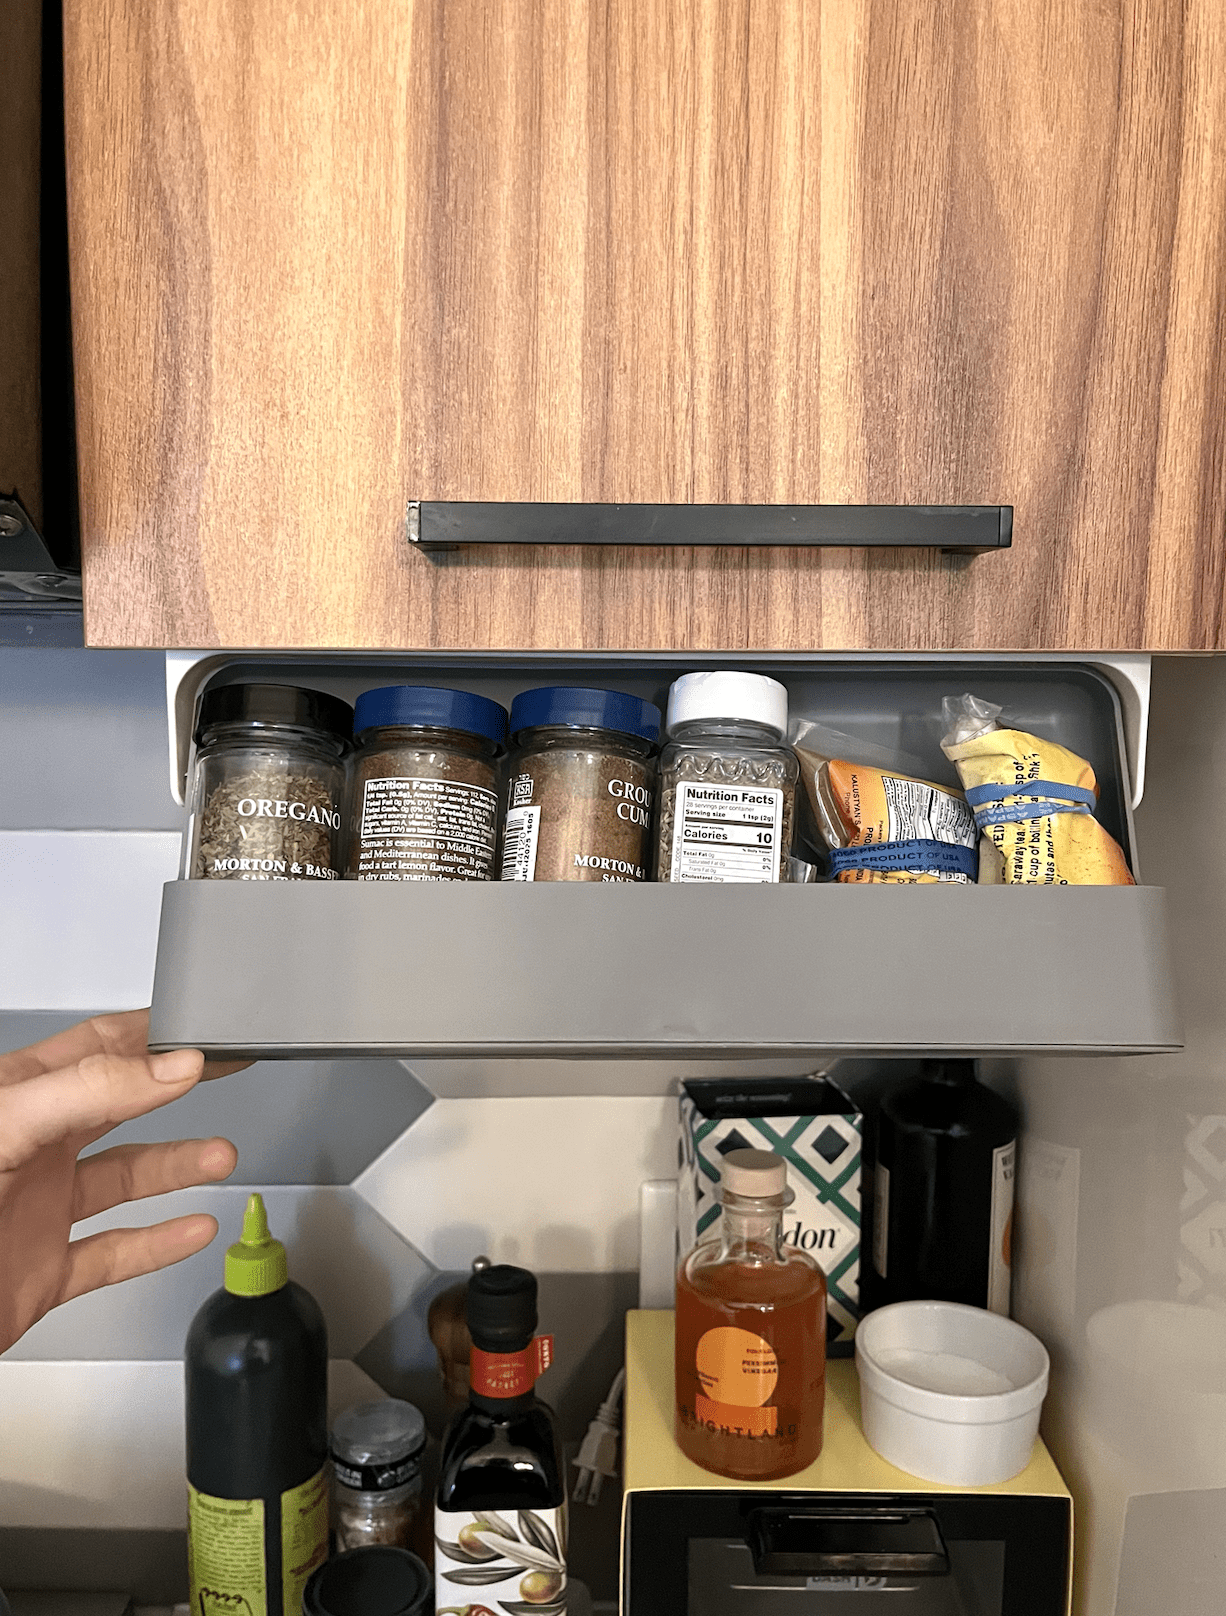 Spice Drawer Organizer for Easy Access to all Your Spices - Dirt and Dough